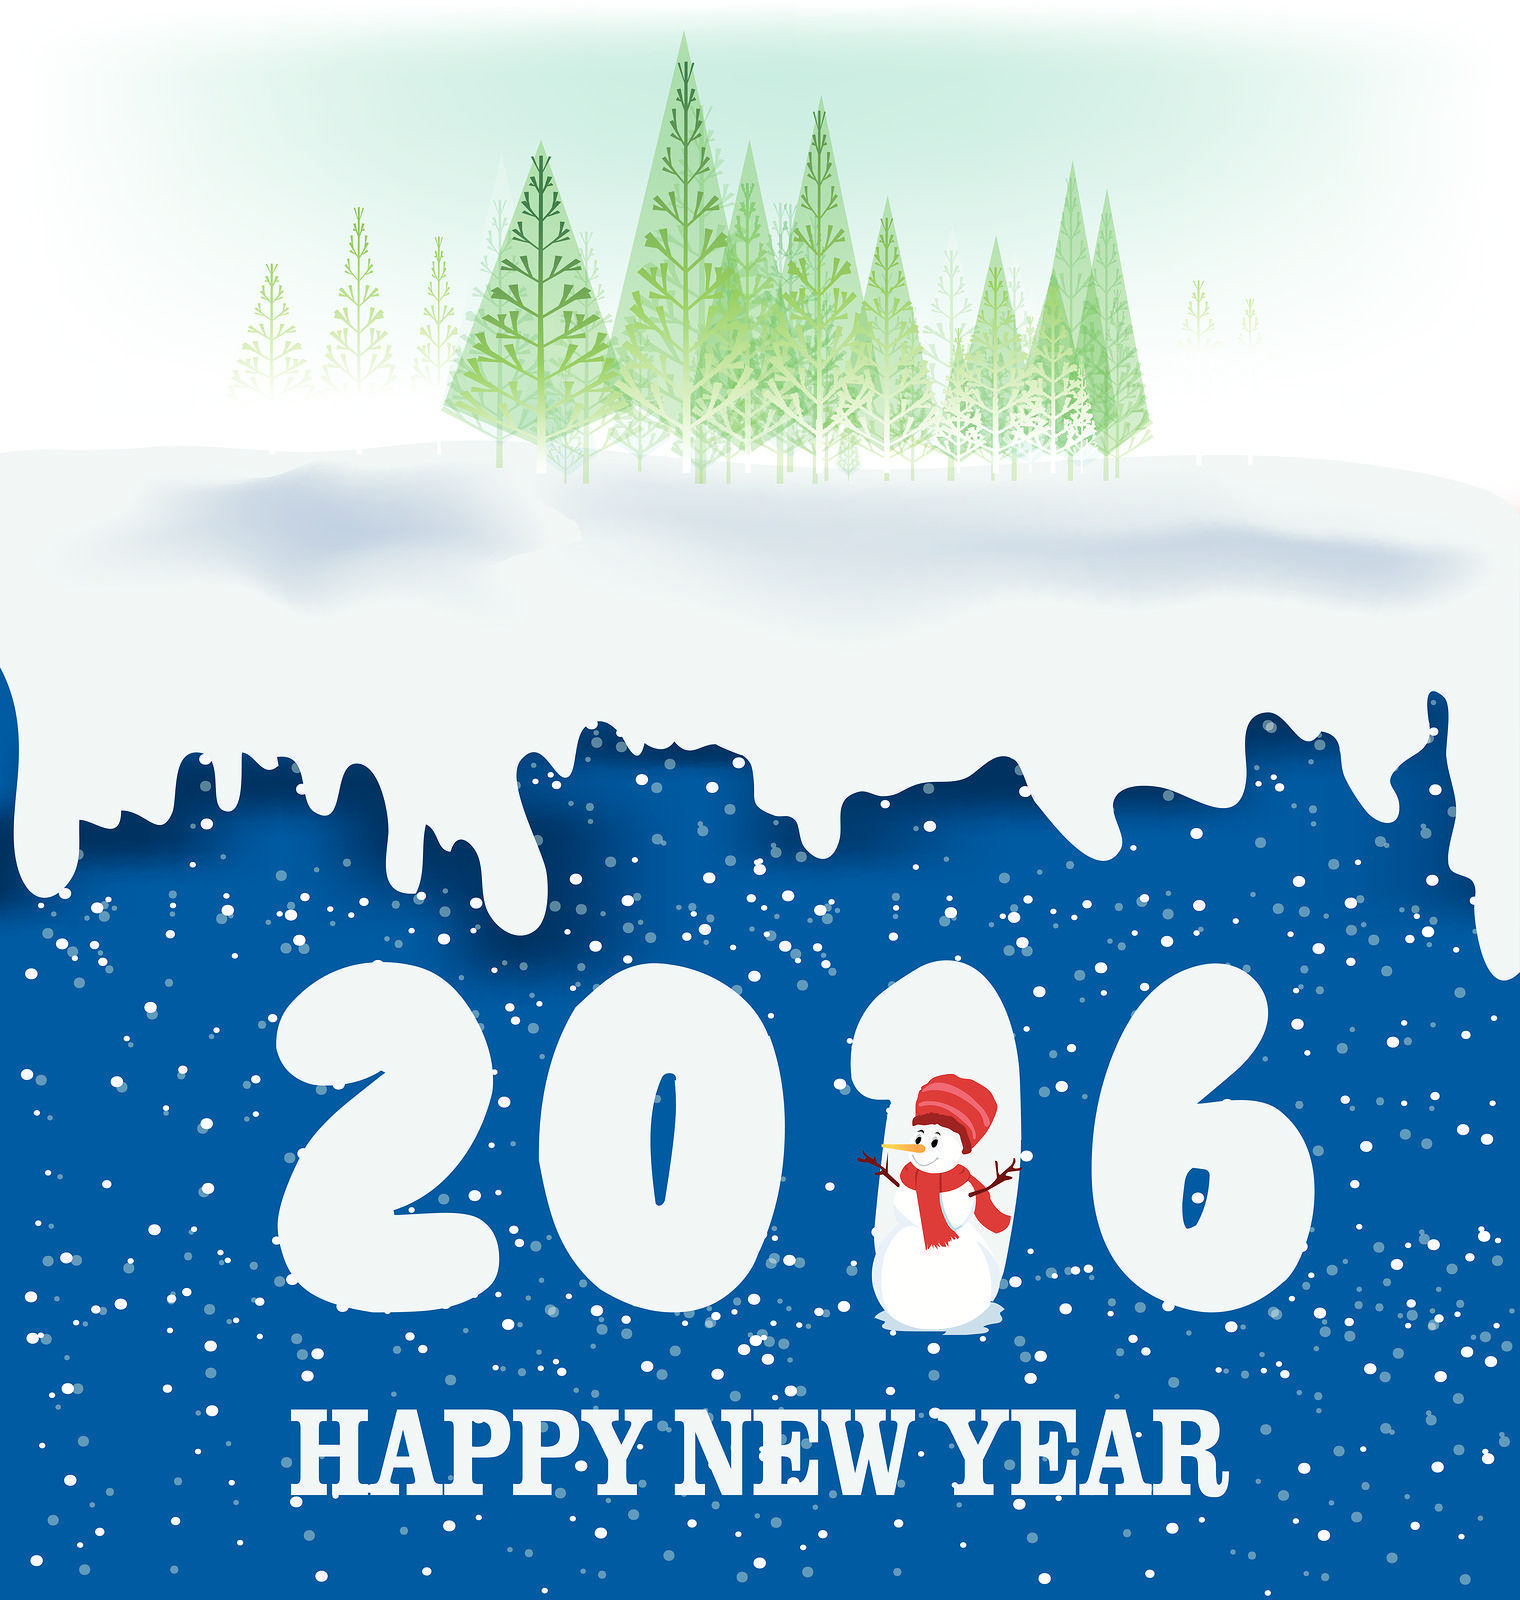 Happy New Year 2016 Messages, Wishes, Image, Quotes, Greetings